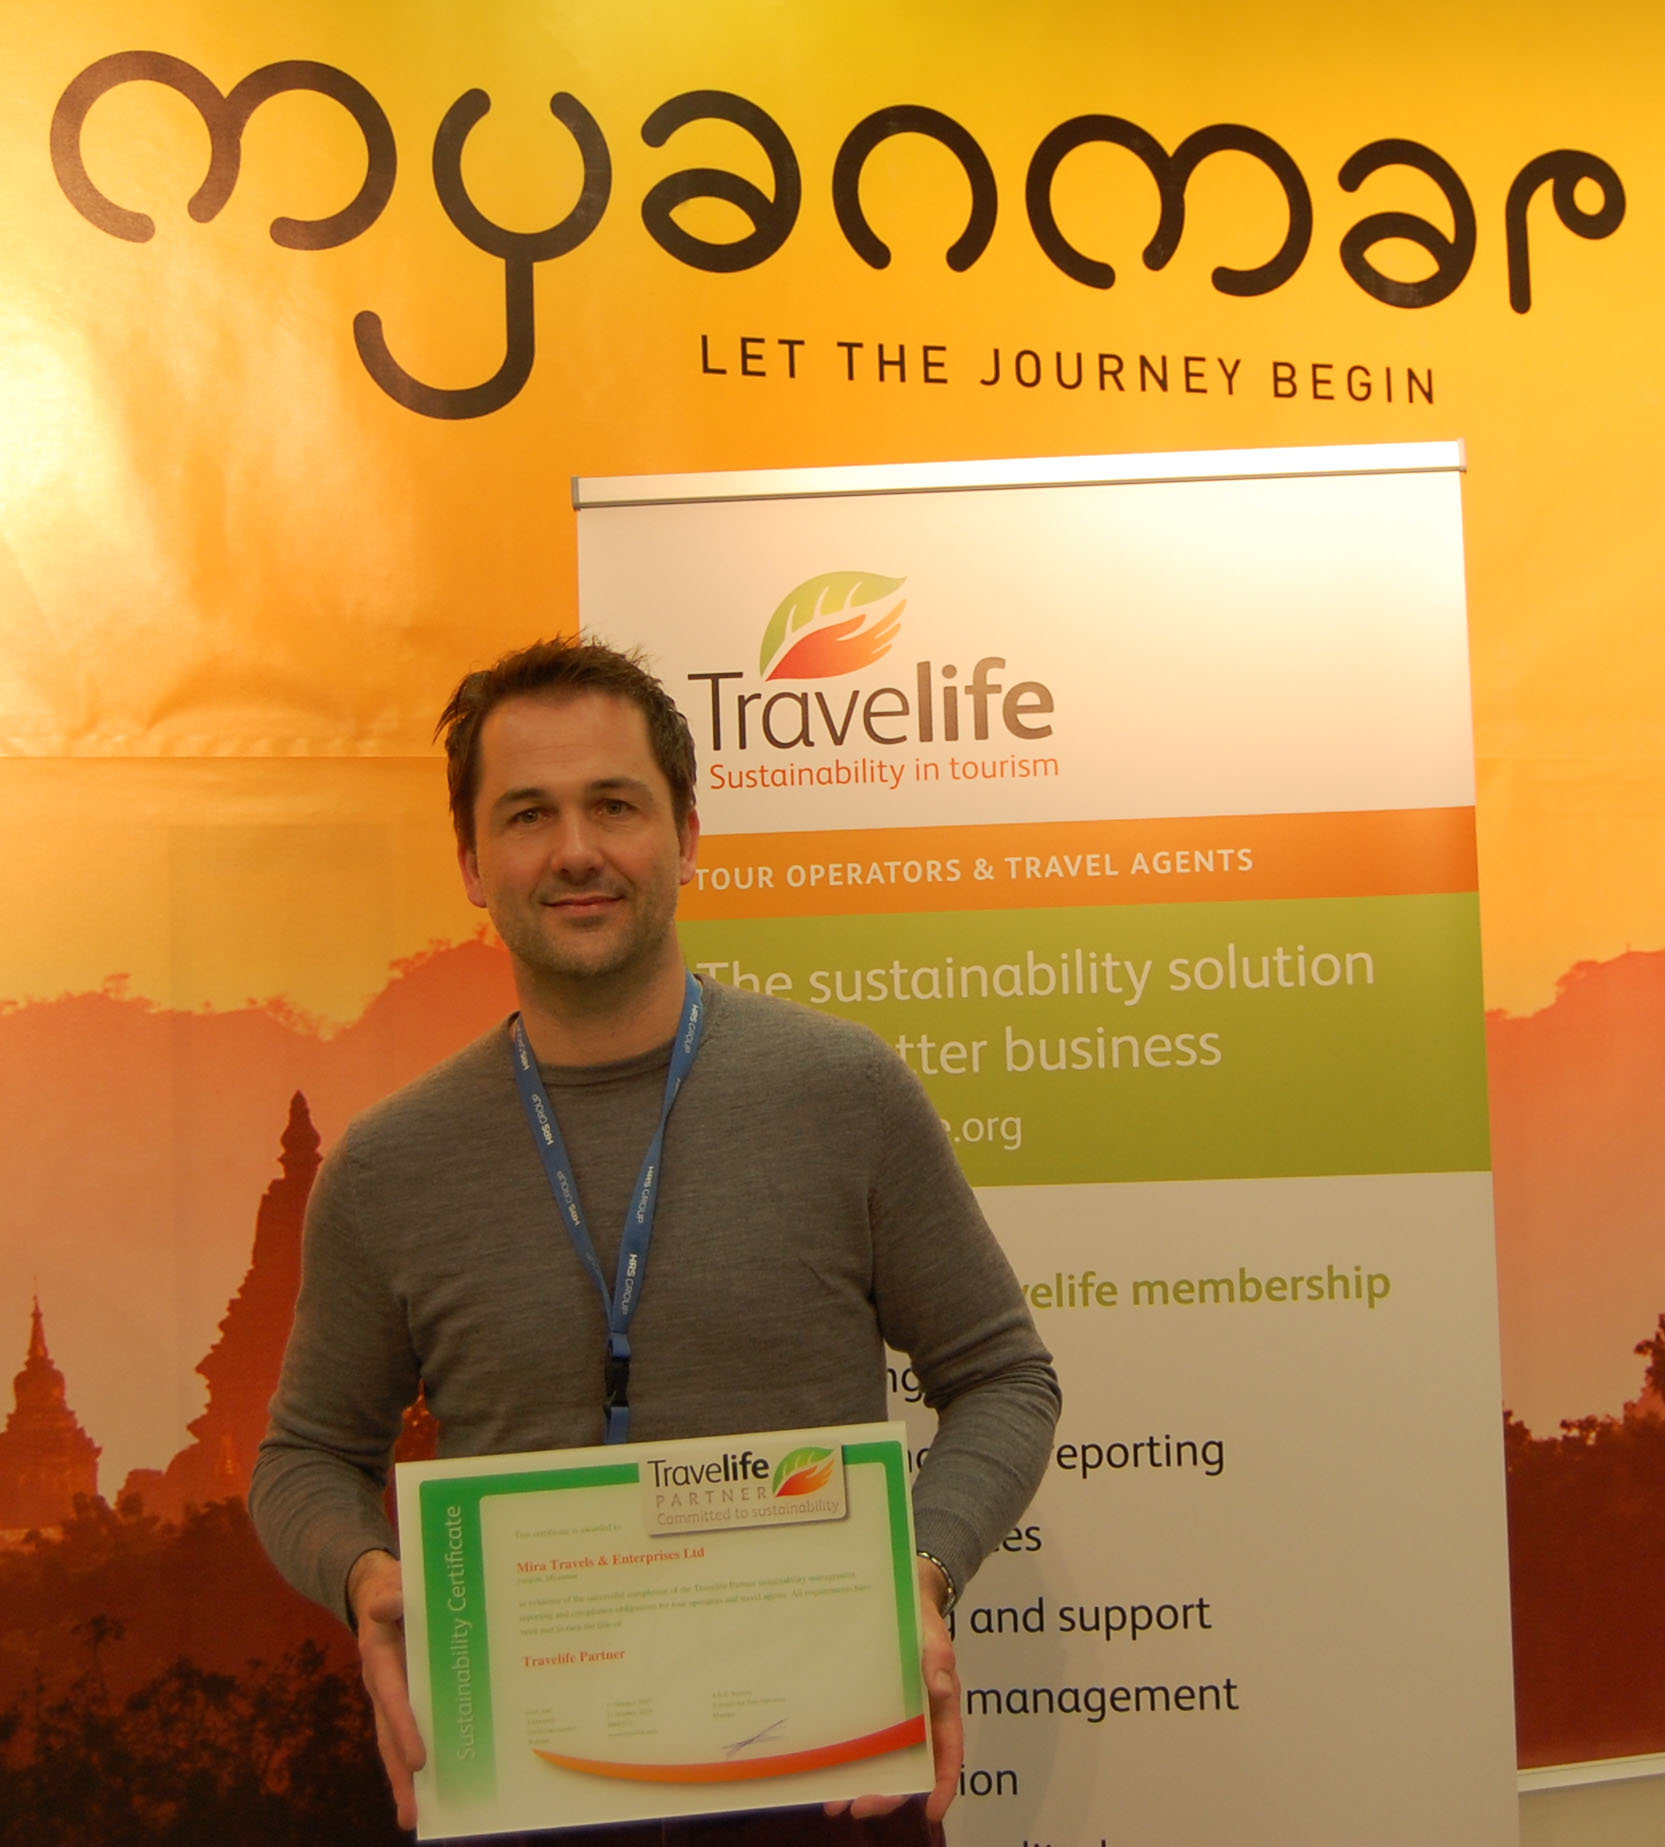 Mira Travels / Myanmar Experiences Center for Educational Travel received Travelife Partner Award at ITB Berlin 2018